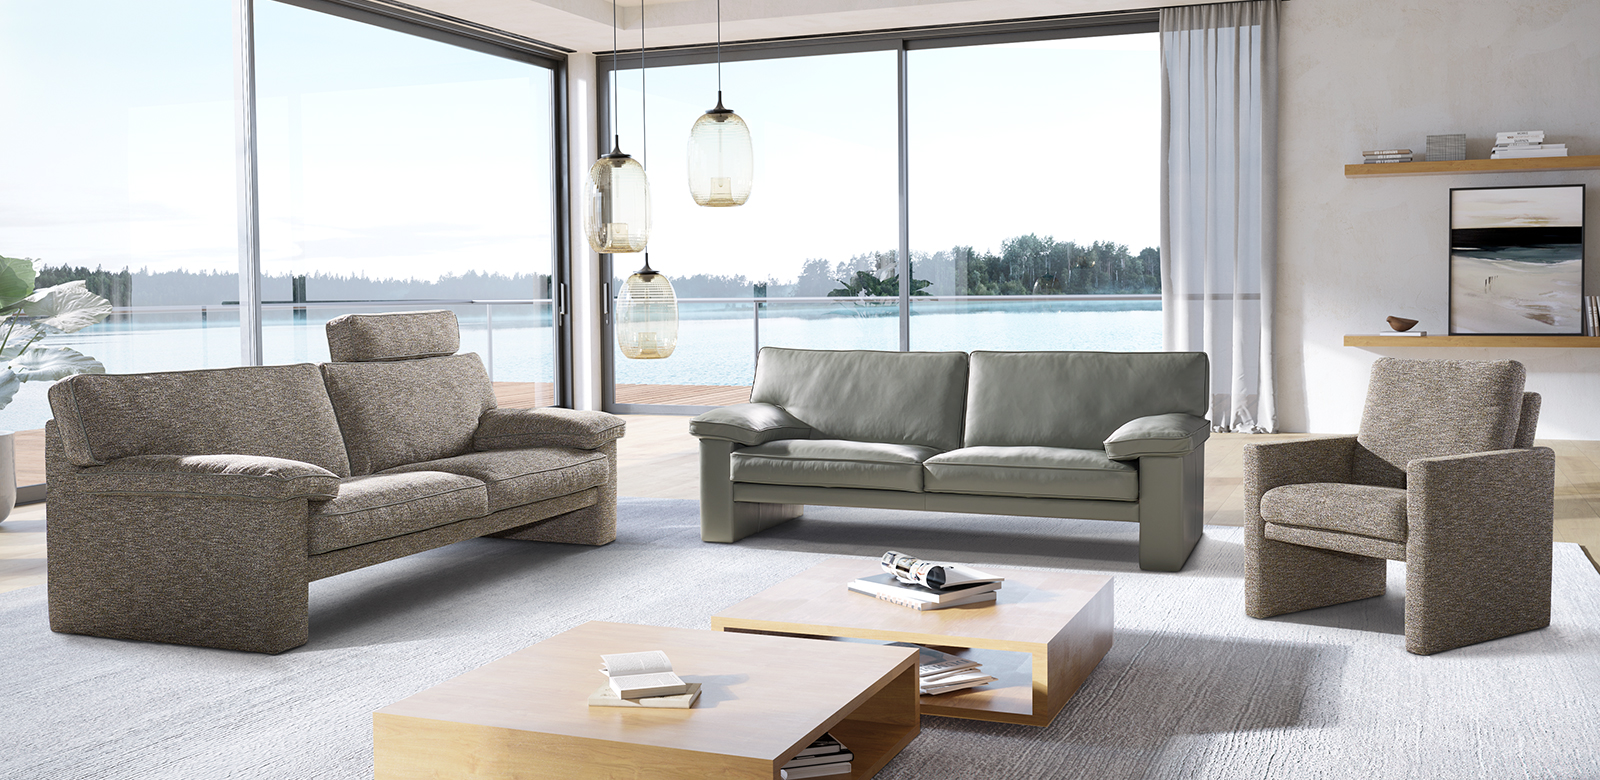 CL360 furniture combination of 2,5-seater and armchair in grey-brown fabric and 2,5-seater in grey-green leather in modern living room by the lake.